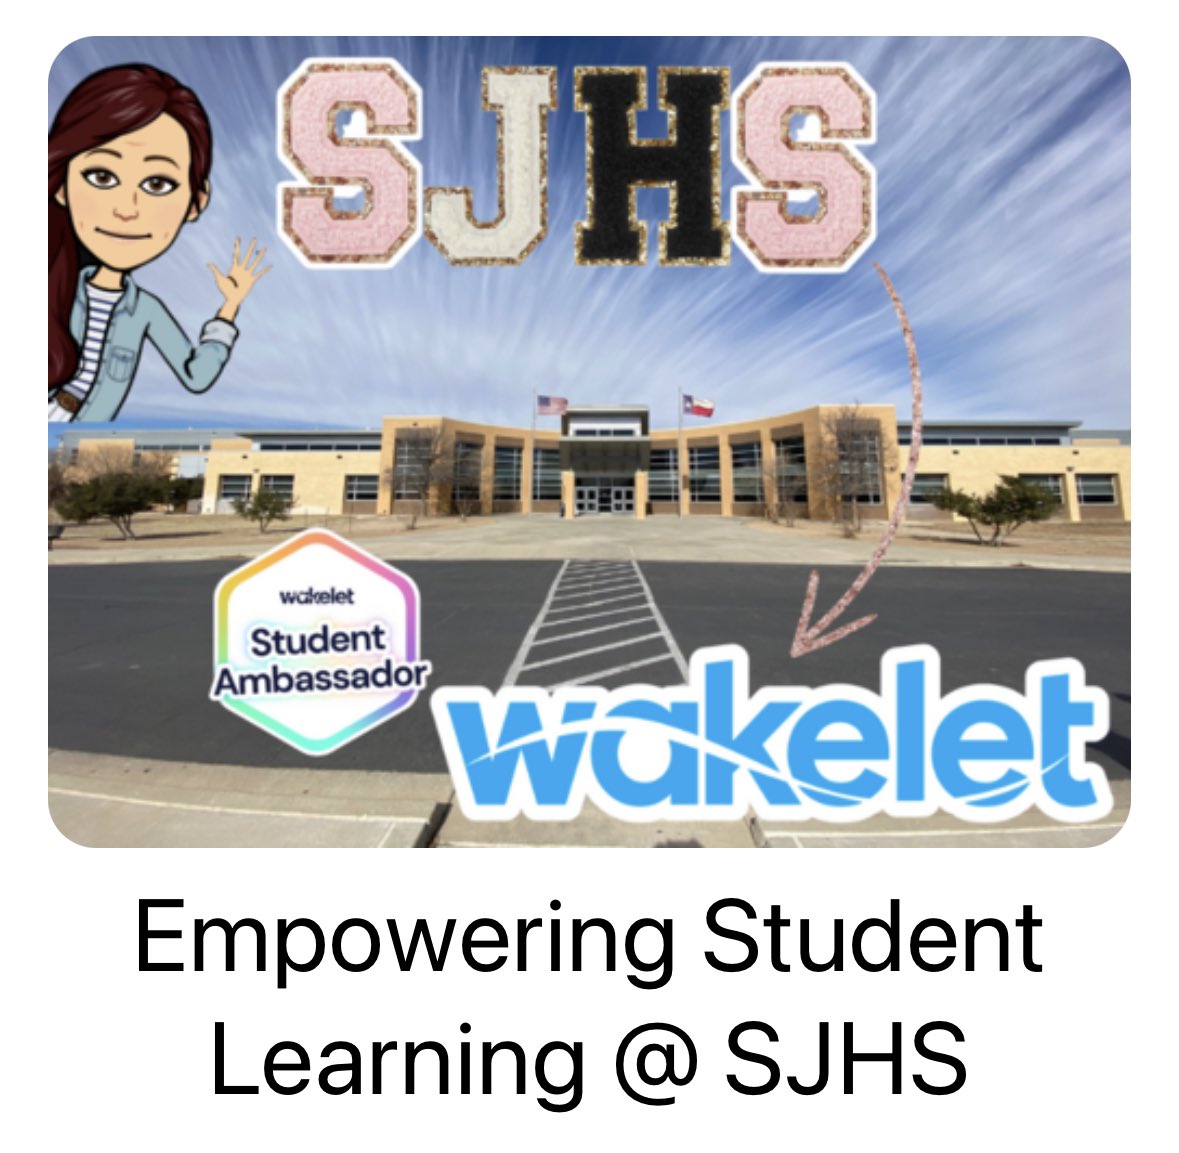 Britt and I talk about @wakelet and the student ambassador program. Watch us here- youtube.com/live/pCL4MzF_0…

Our resources from our session can be found here- wakelet.com/wake/iQQ395uGC…

#WakeletCommunityWeek